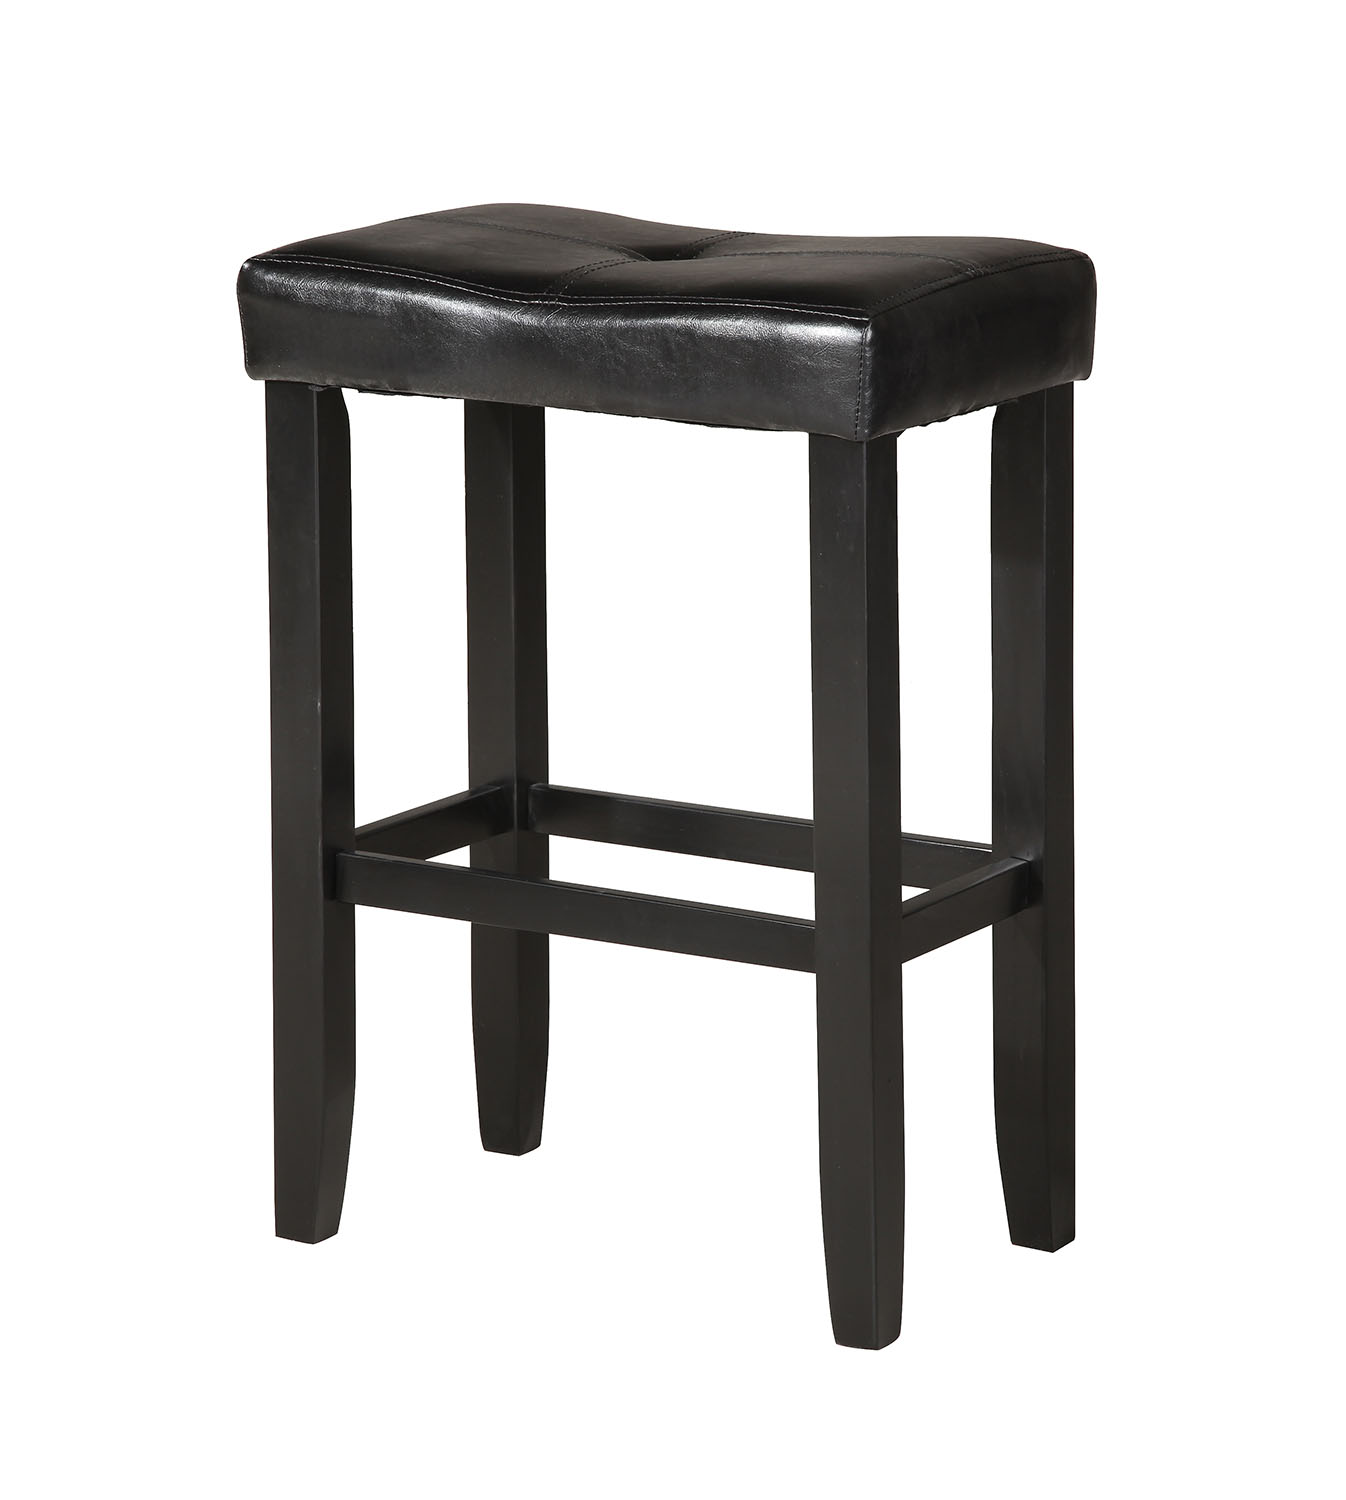 21" X 14" X 24" 2pc Black And Black Swivel Counter Height Stool